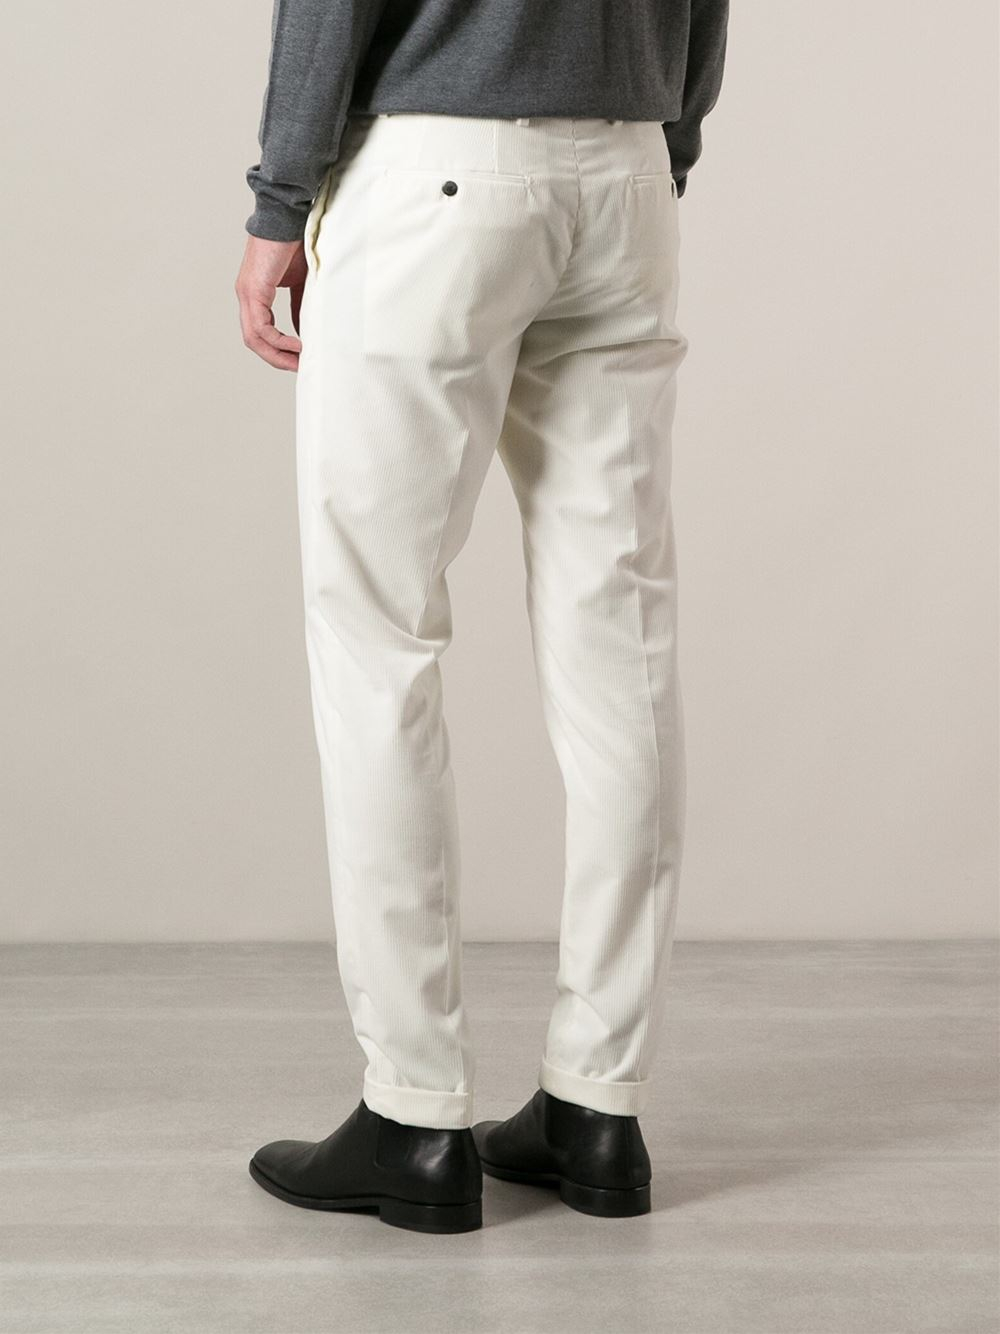 Lyst - Façonnable Corduroy Trousers in White for Men